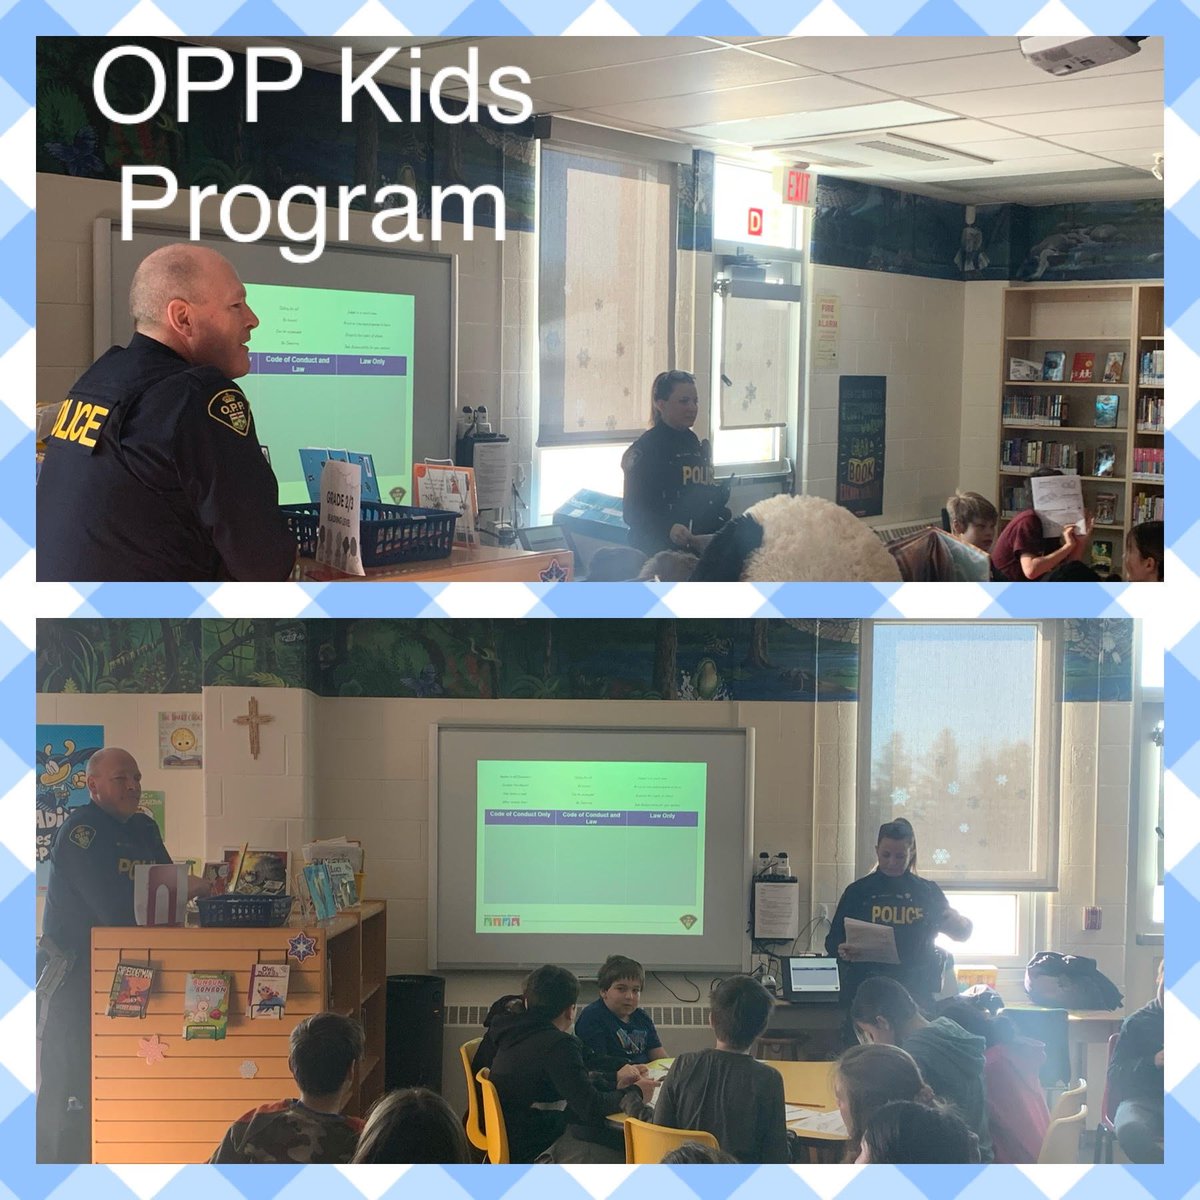 We are so excited that our Gr. 6 students are able to participate in the OPP Kids Program once again this year!  Here we have Constable Nie and Constable Ingram leading our great discussions!  #pvncinspires #stmartinpride #PtboOPP @OPP_CR